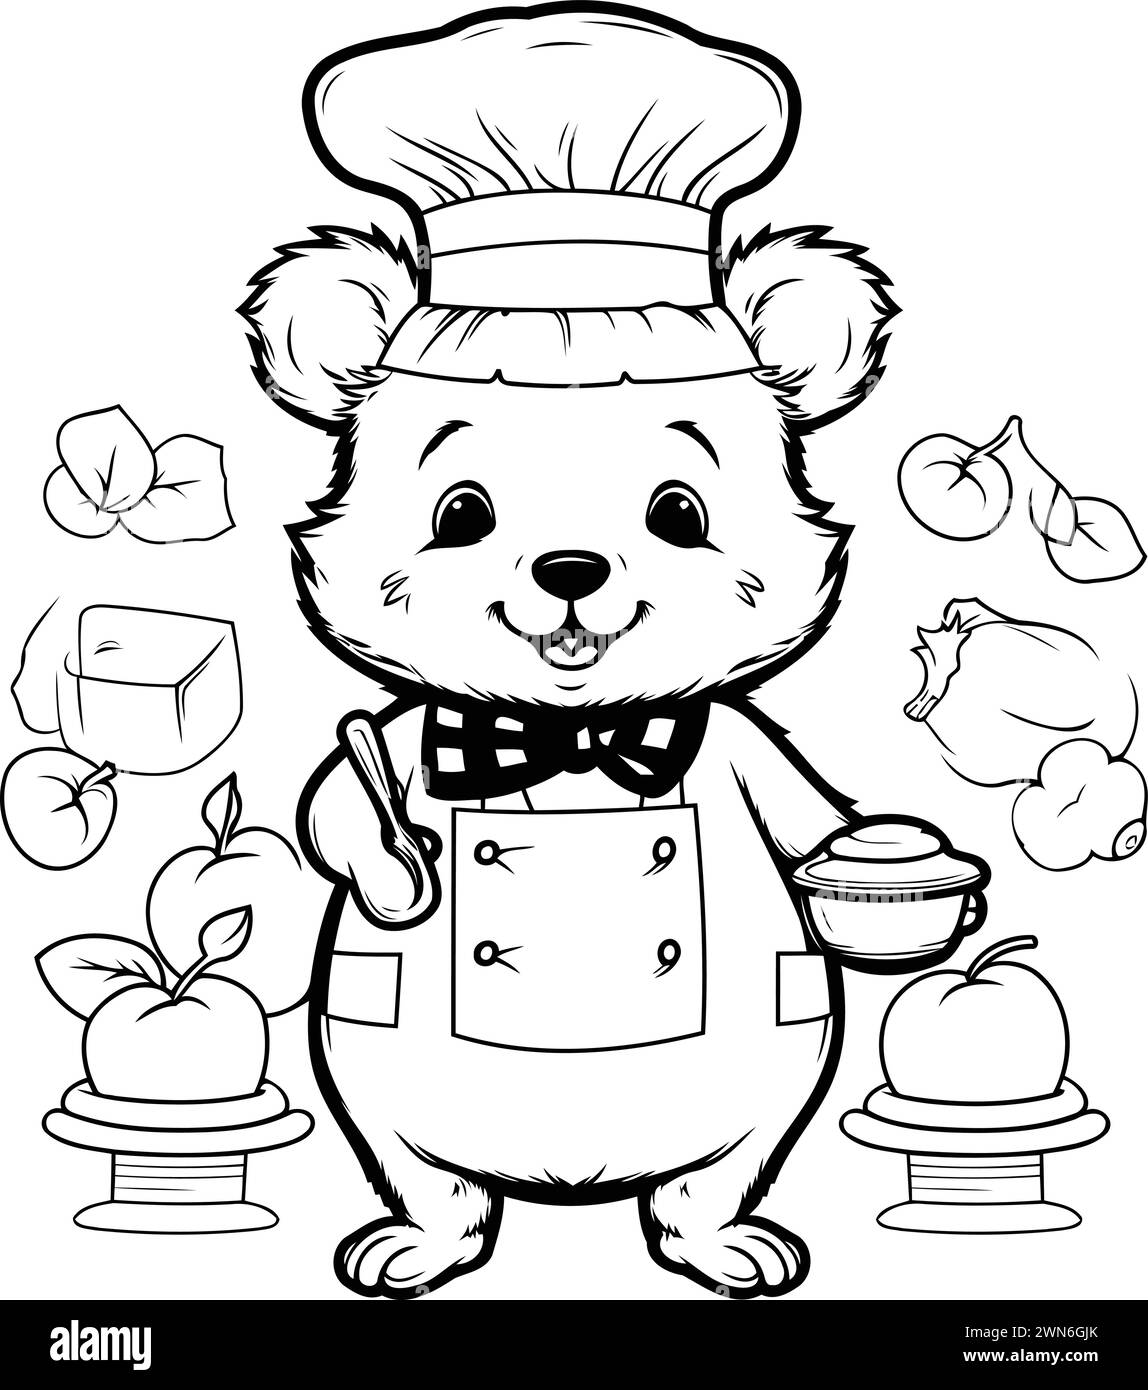 Cute cartoon bear chef with food. Vector illustration coloring page. Stock Vector